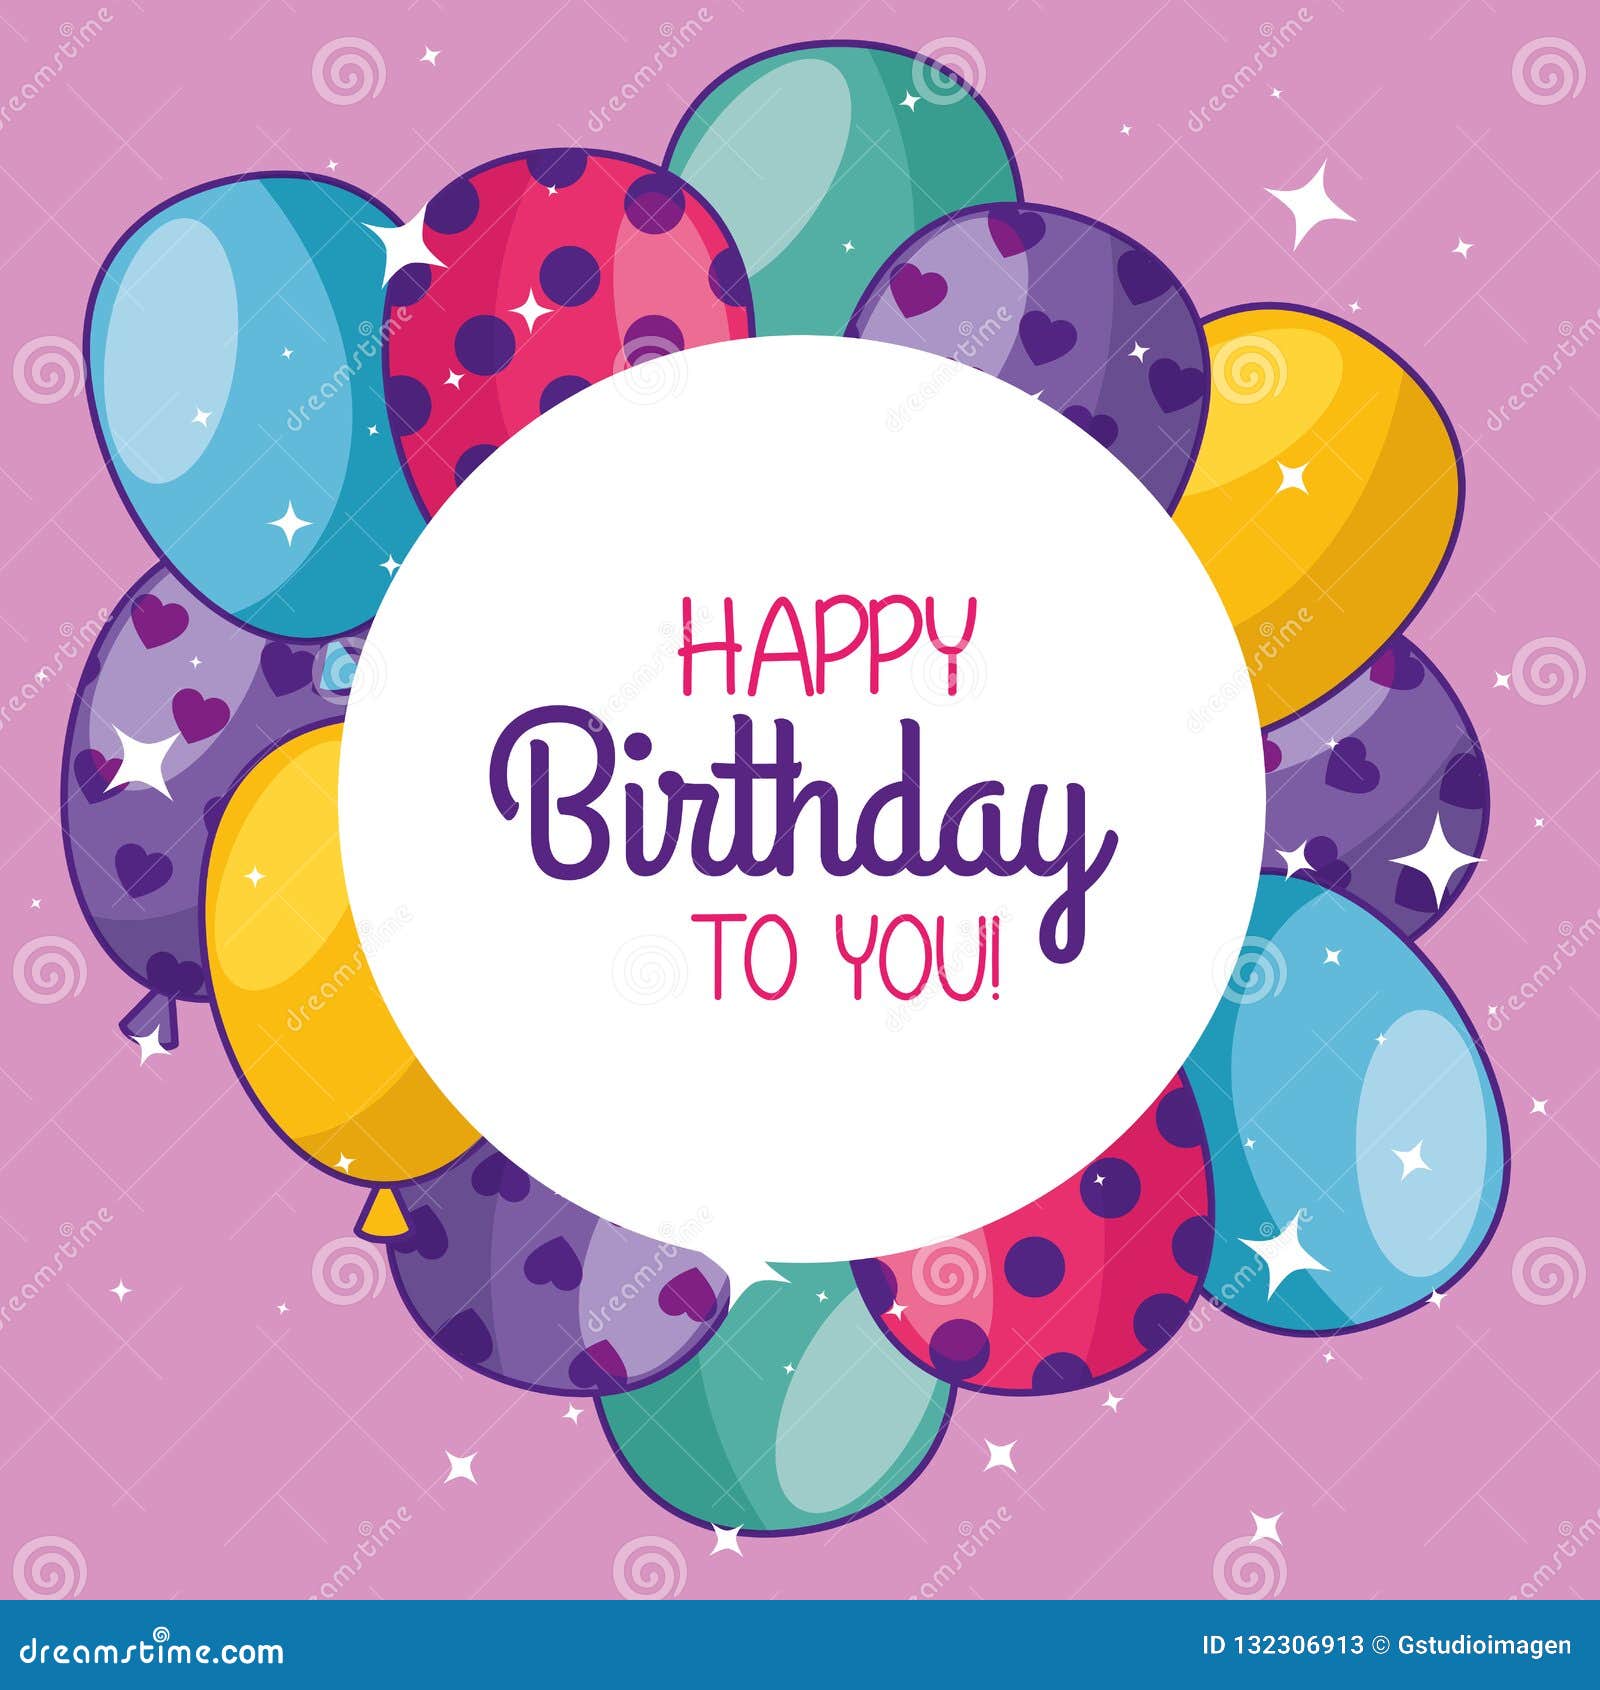 Happy Birthday with Balloons and Sticker Decoration Stock Vector ...